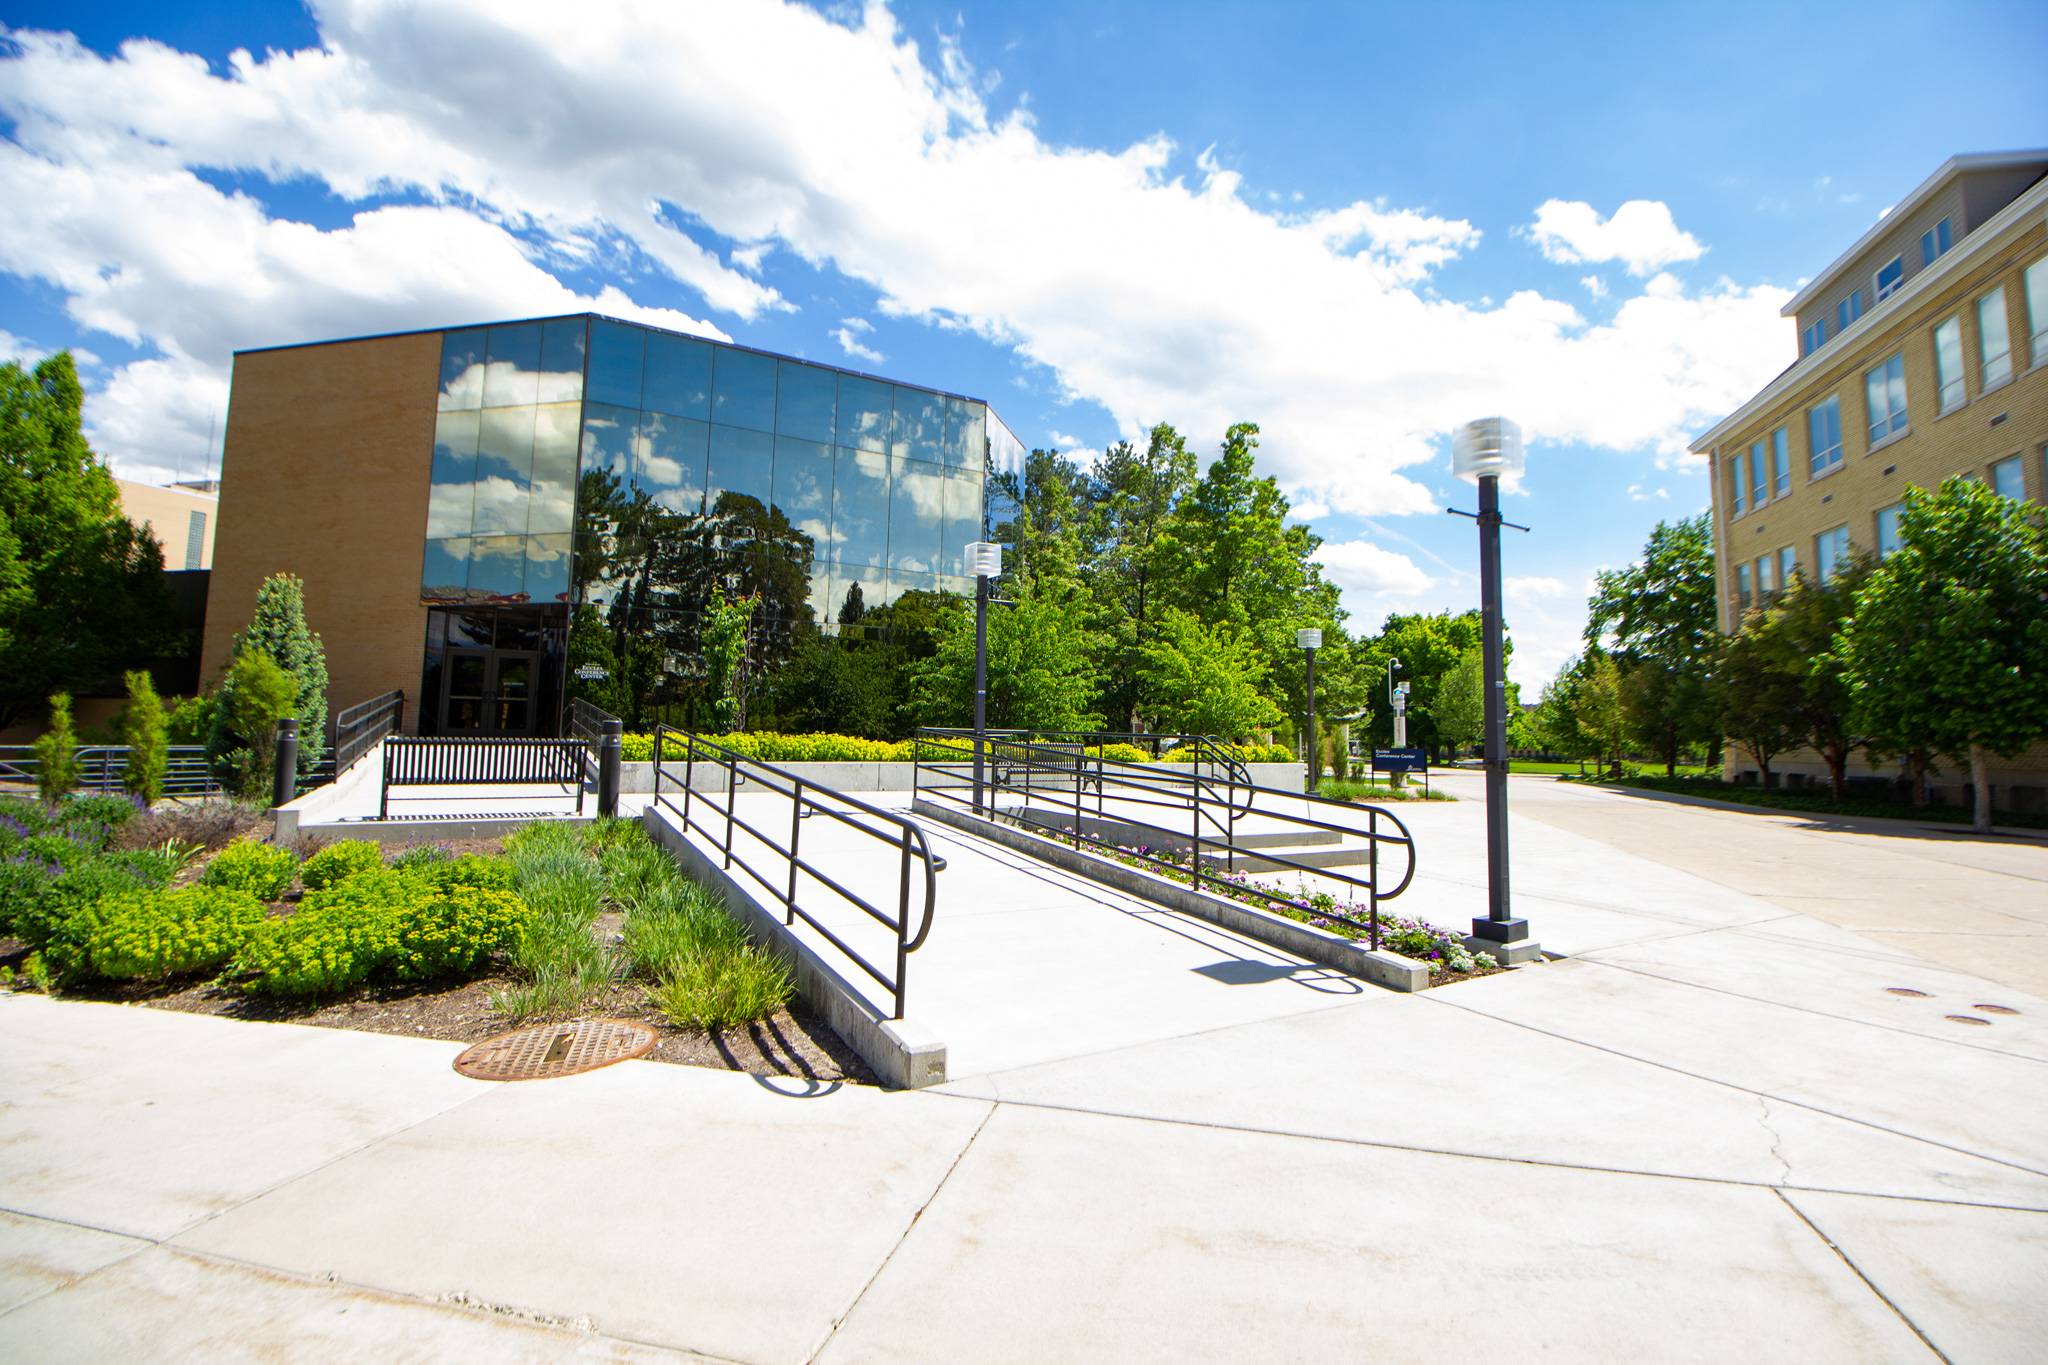 Eccles Conference Center